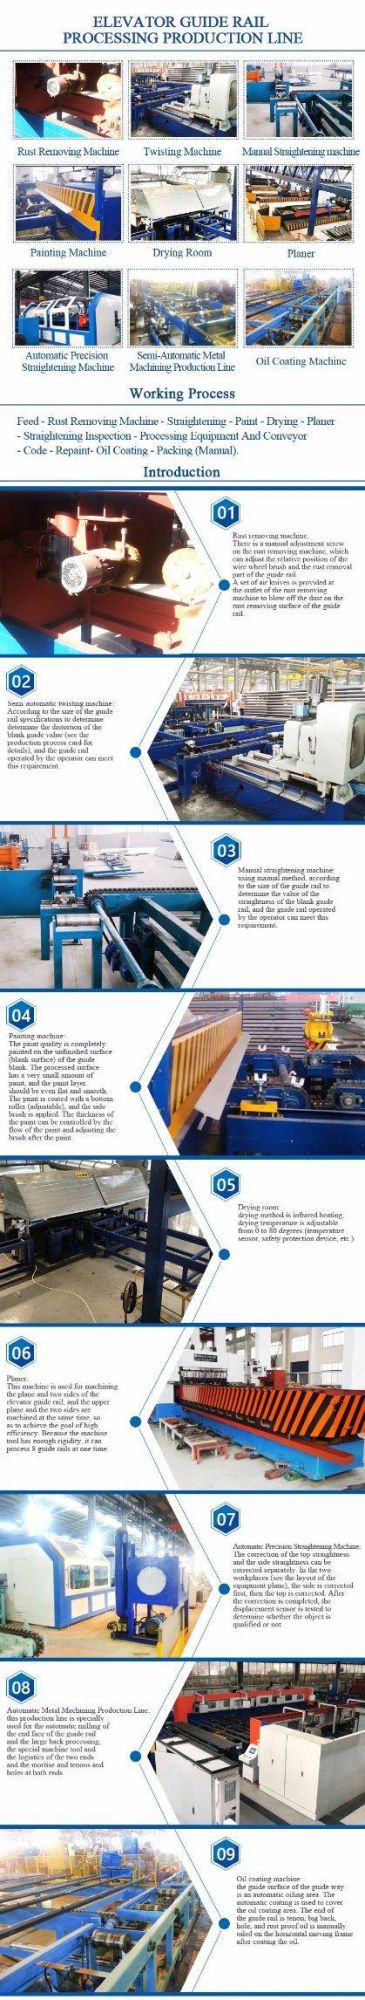 New Production Line 2020 Processing Production Line High Speed Elevator Hollowor Guide Rail Roll Forming Machine